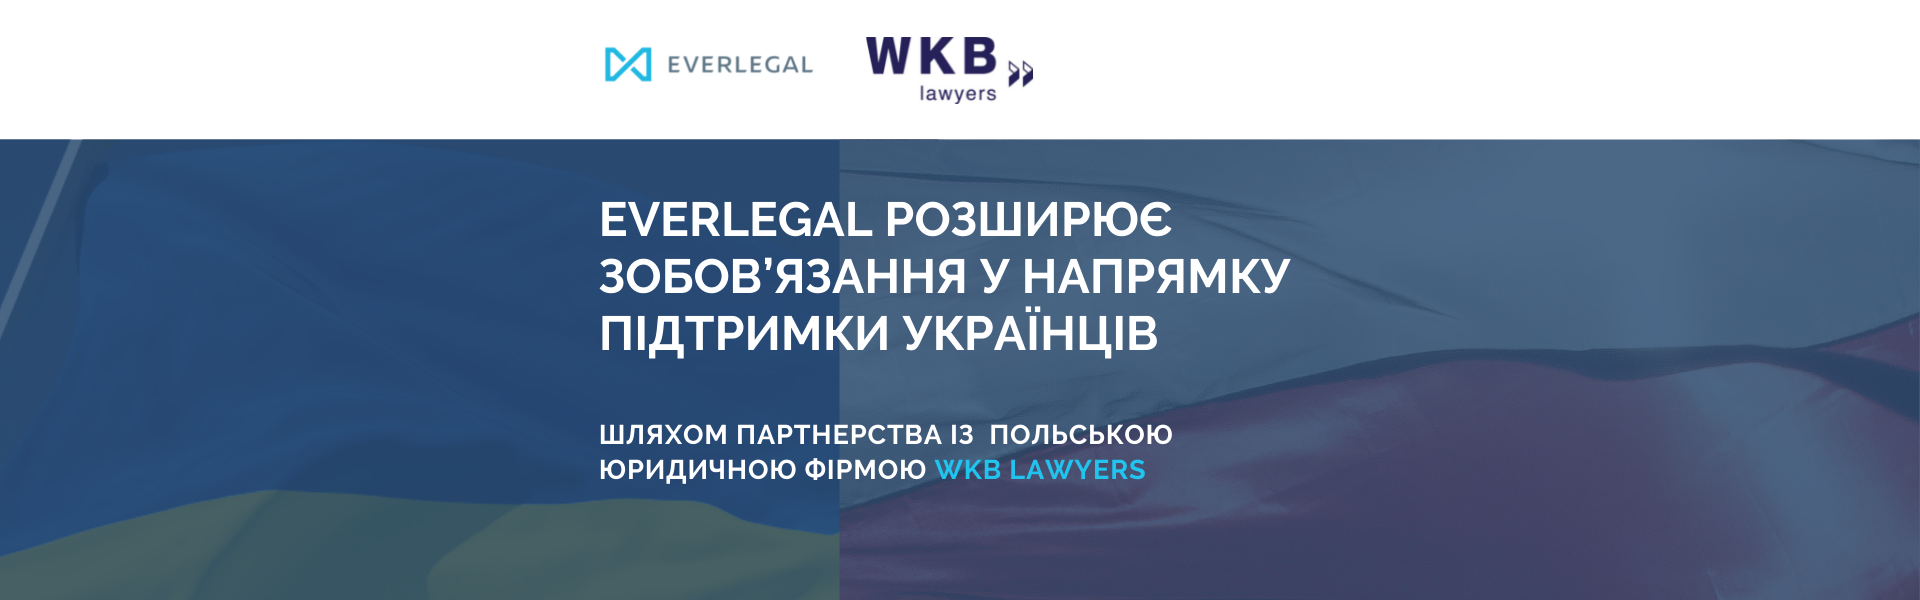 EVERLEGAL reinforces its commitment to support Ukrainians